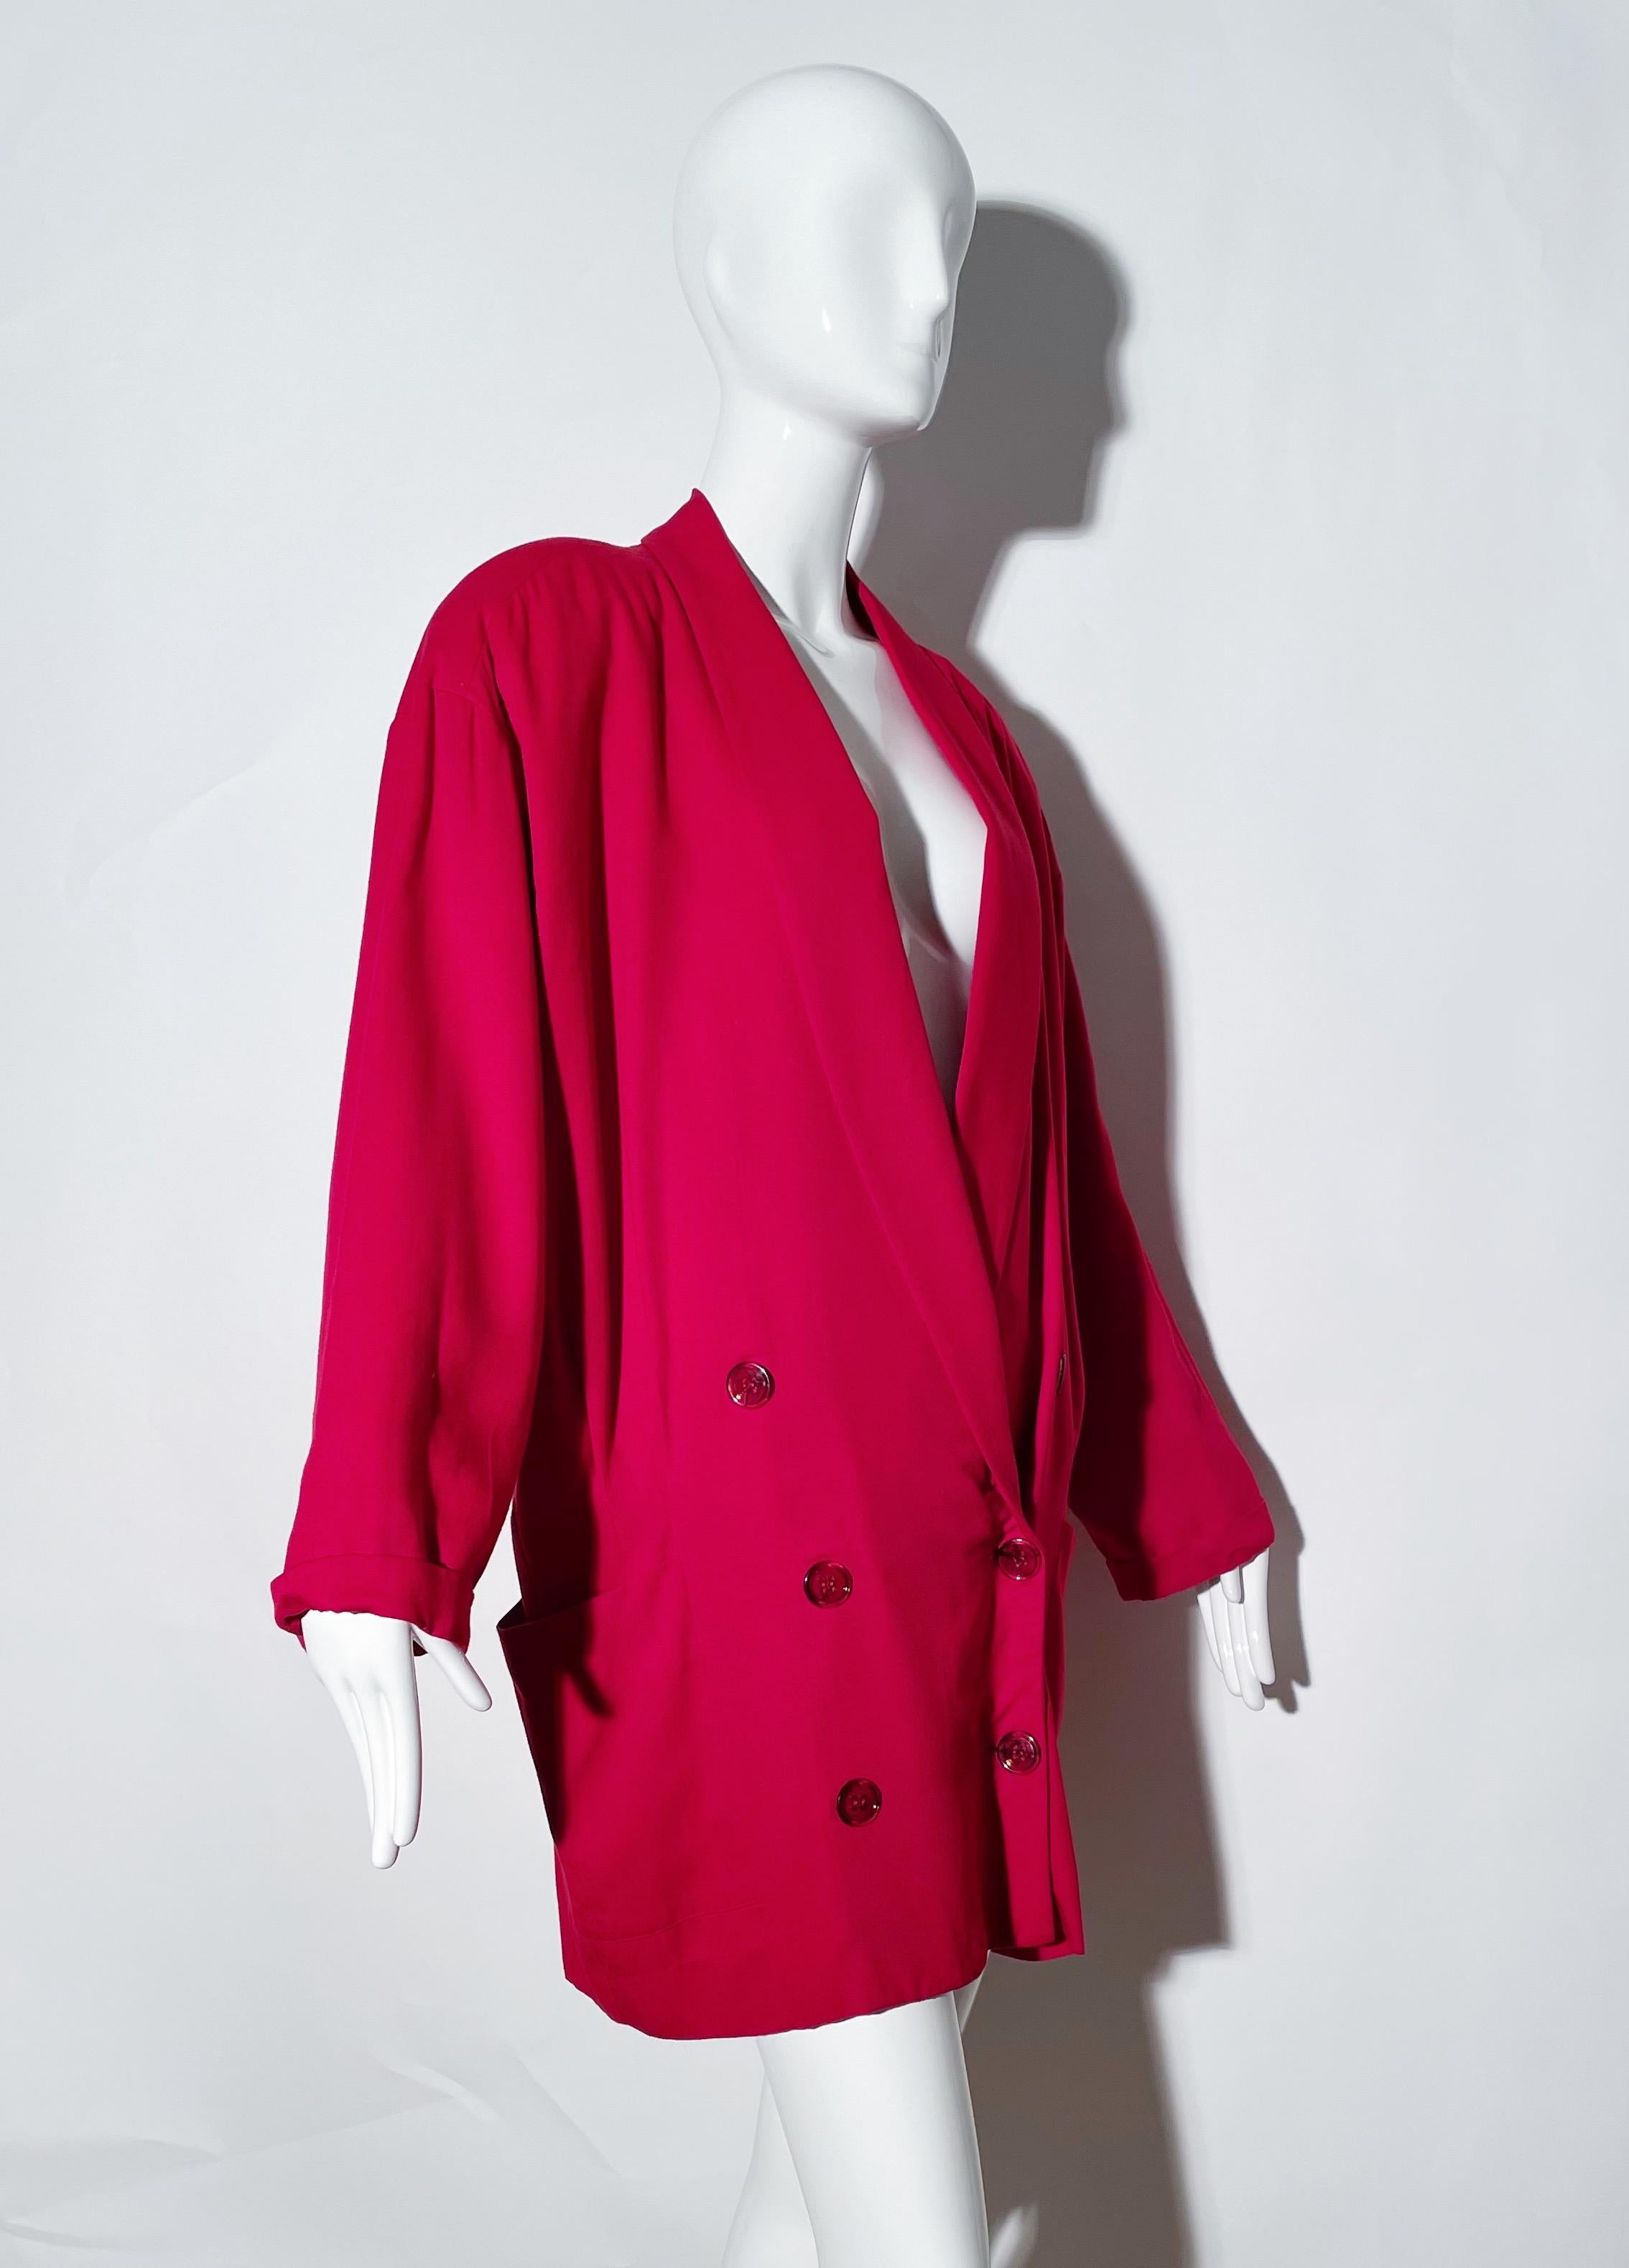 Norma Kamali Red Blazer Dress In Excellent Condition For Sale In Waterford, MI